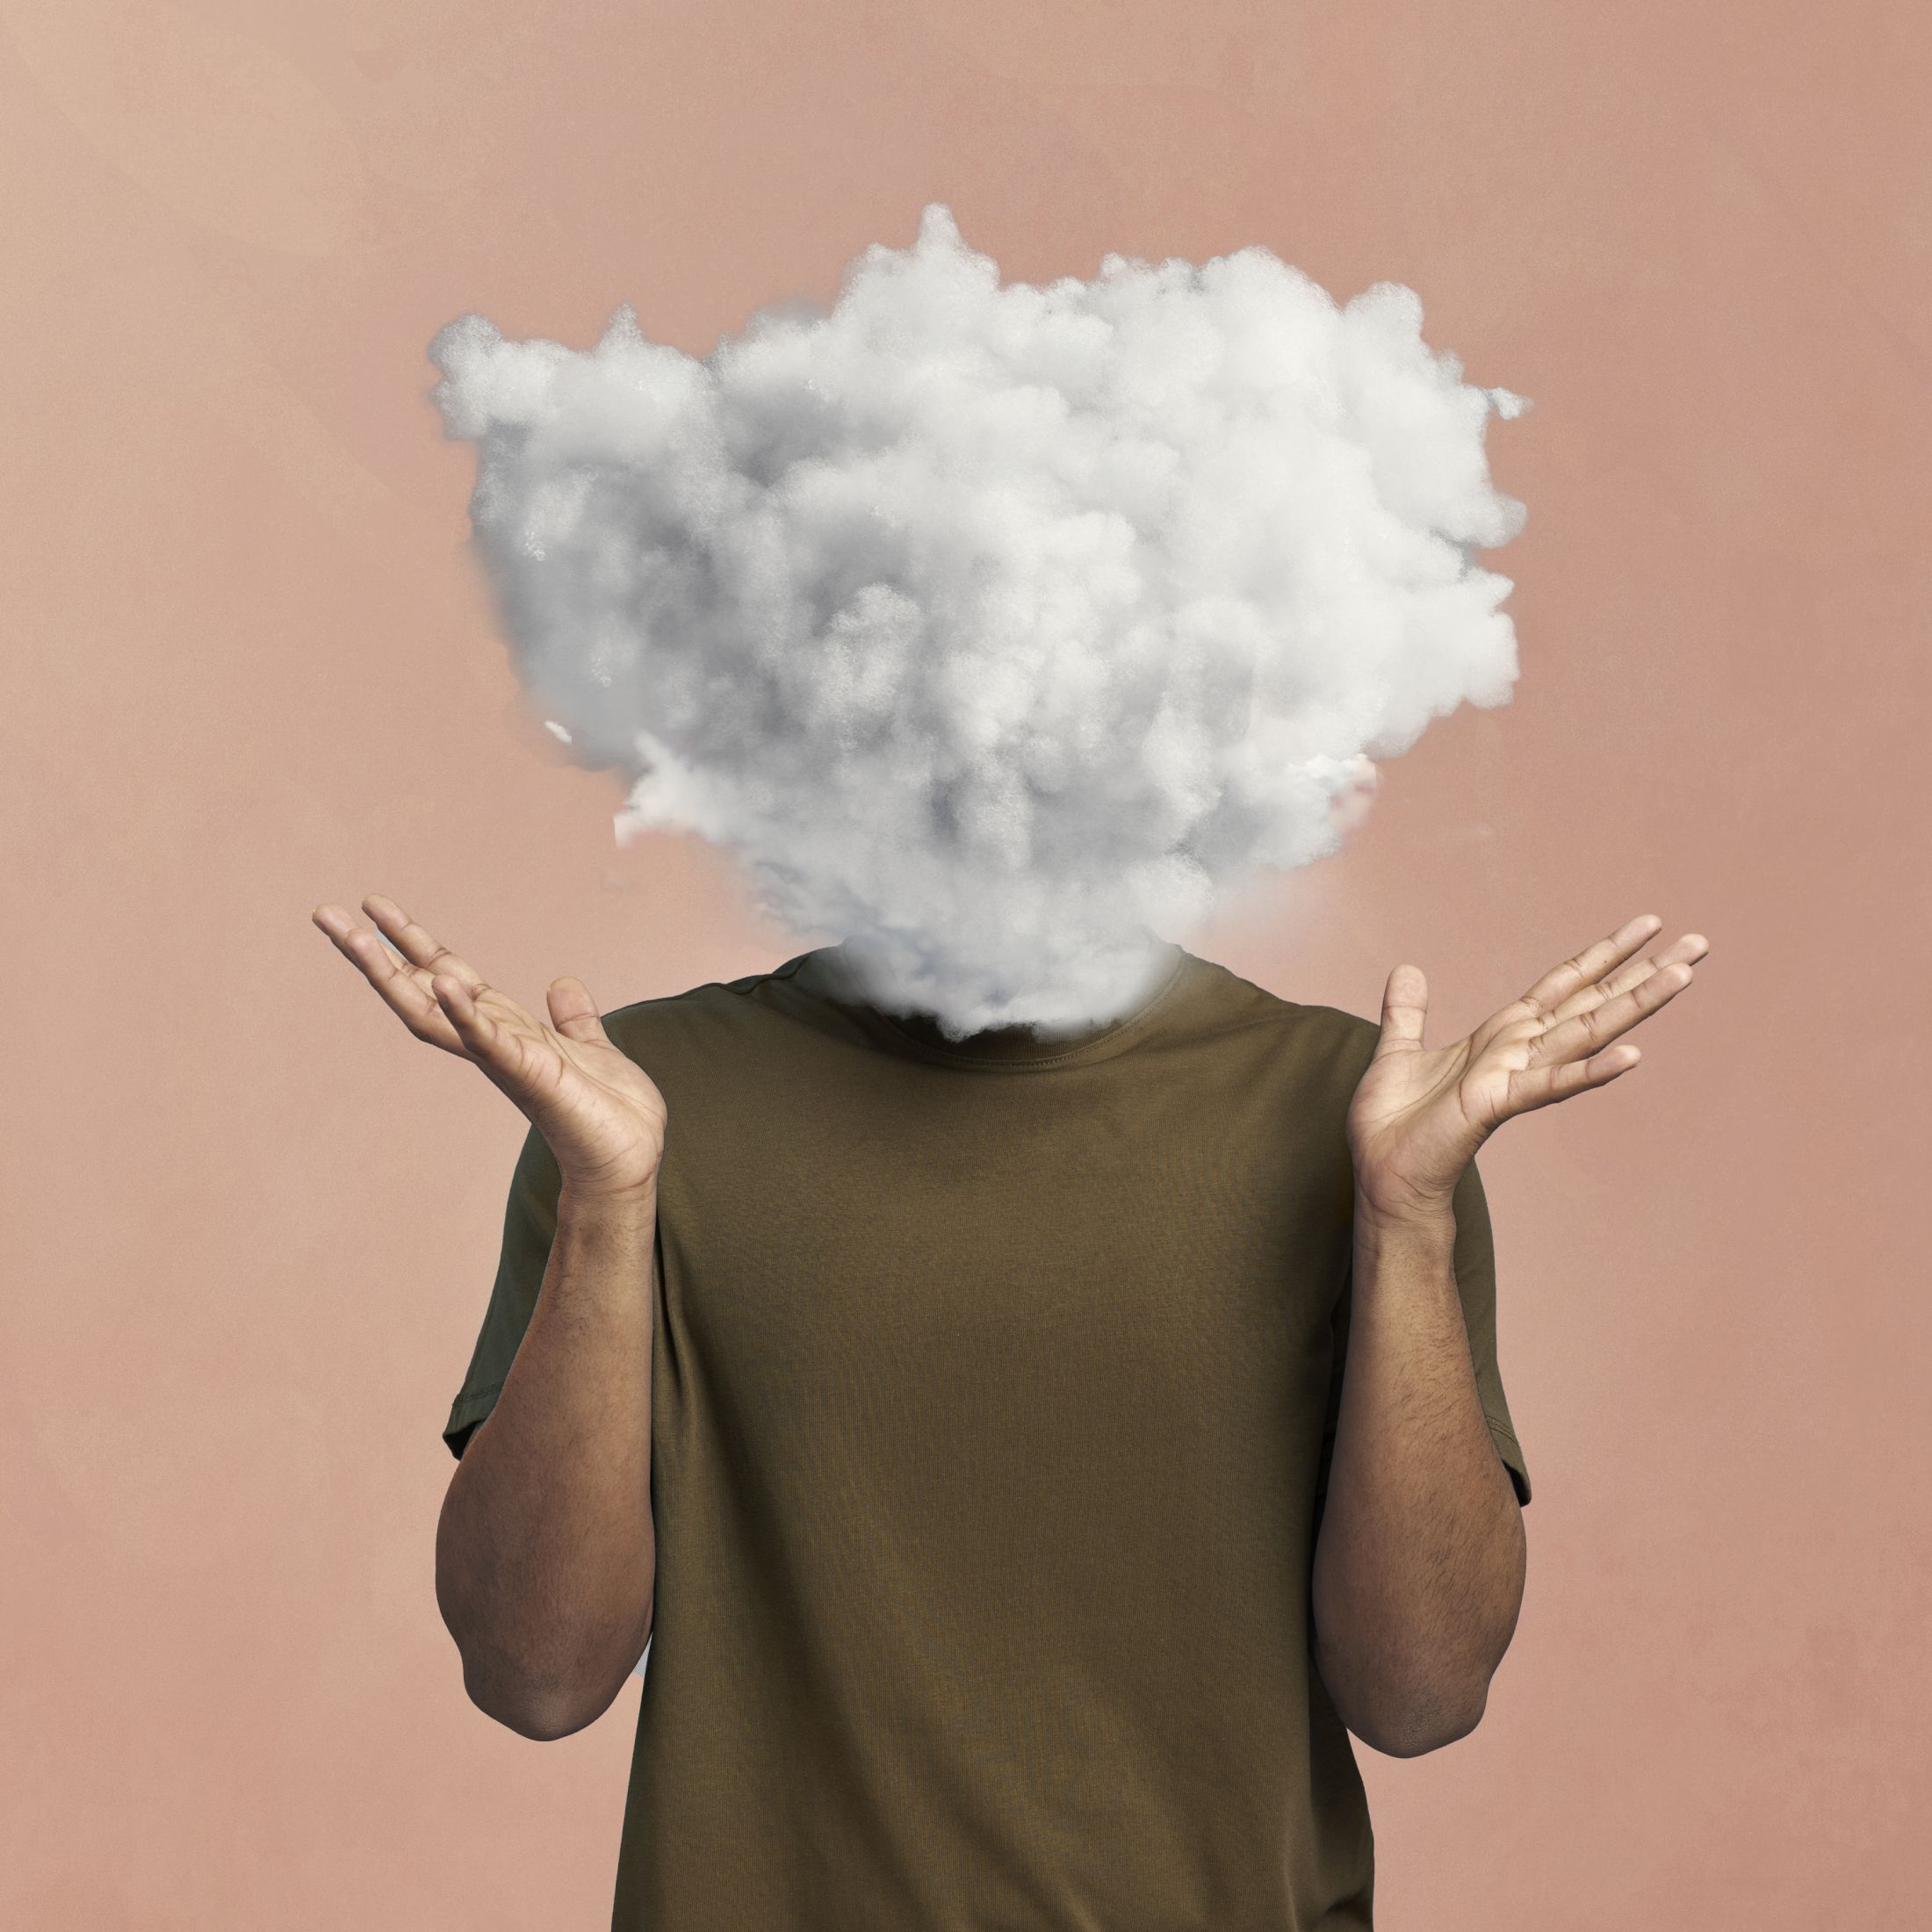 cloud-shaped-heads-collage.jpg